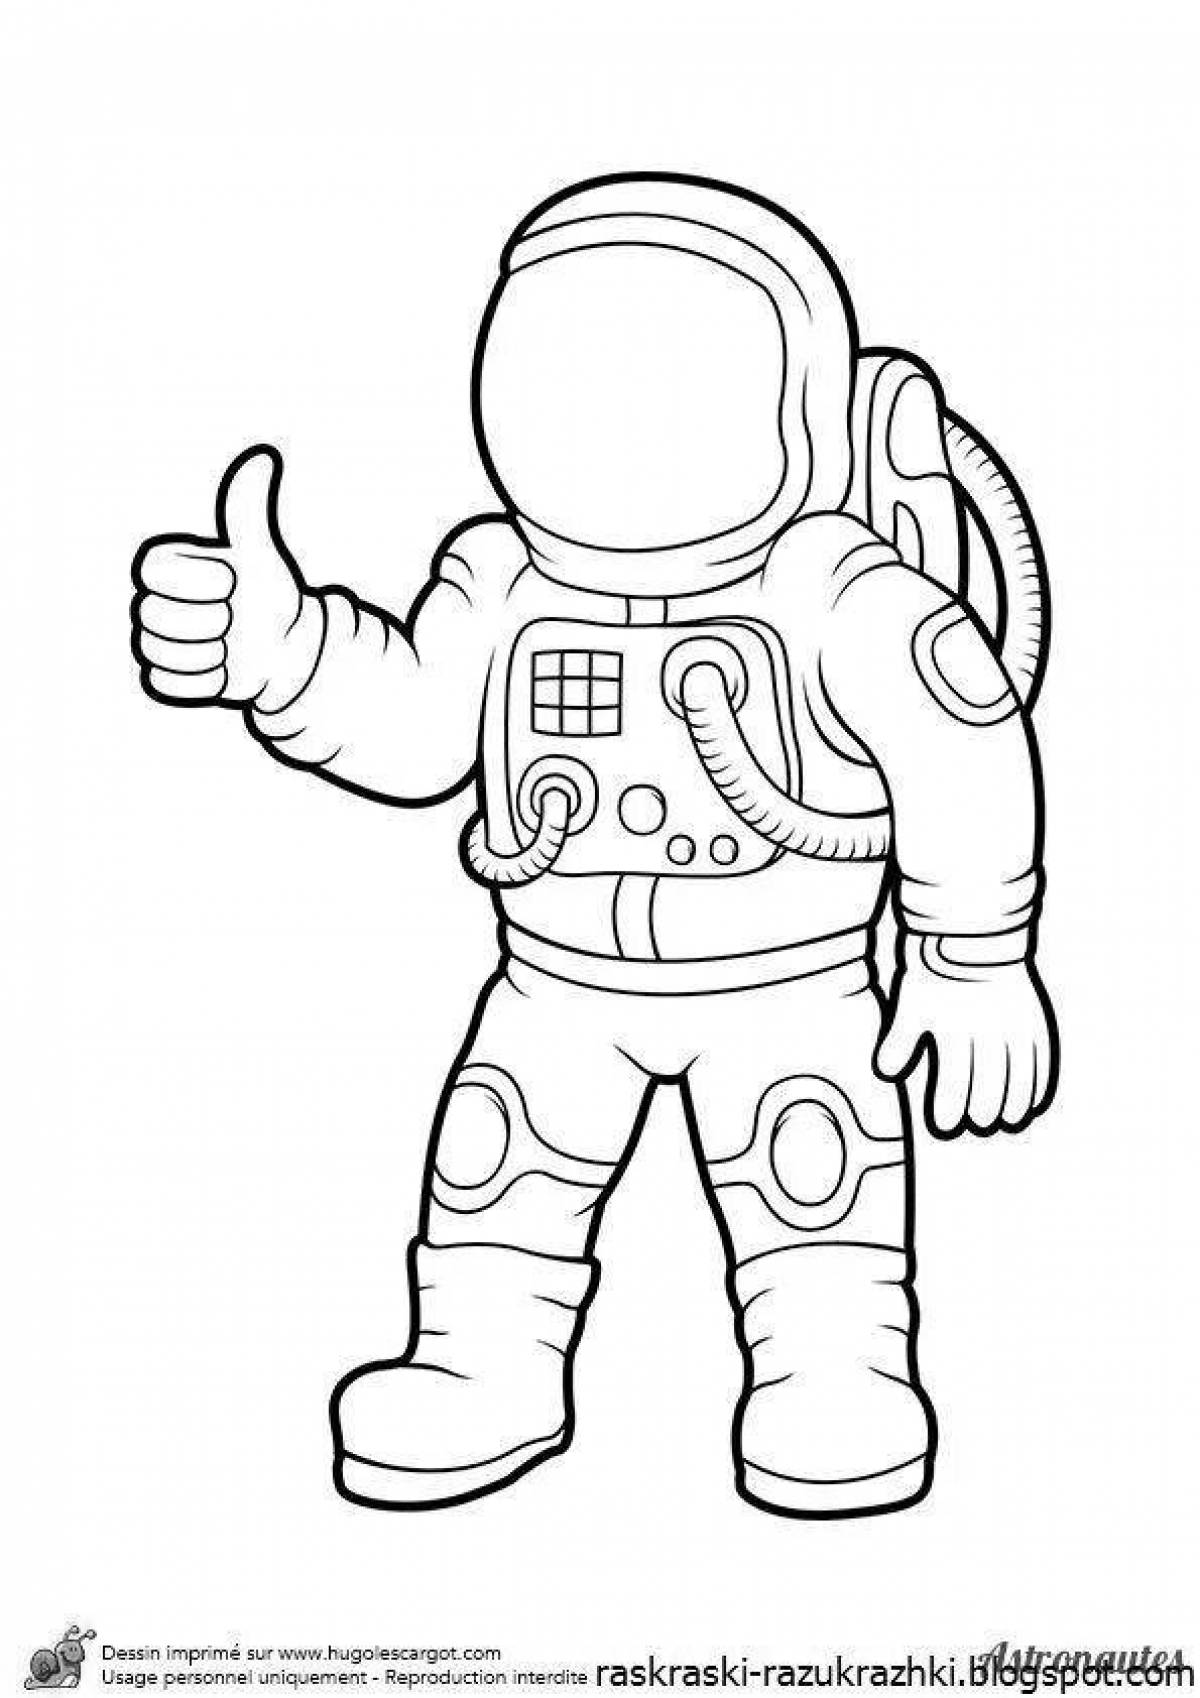 Fancy astronaut coloring for kids